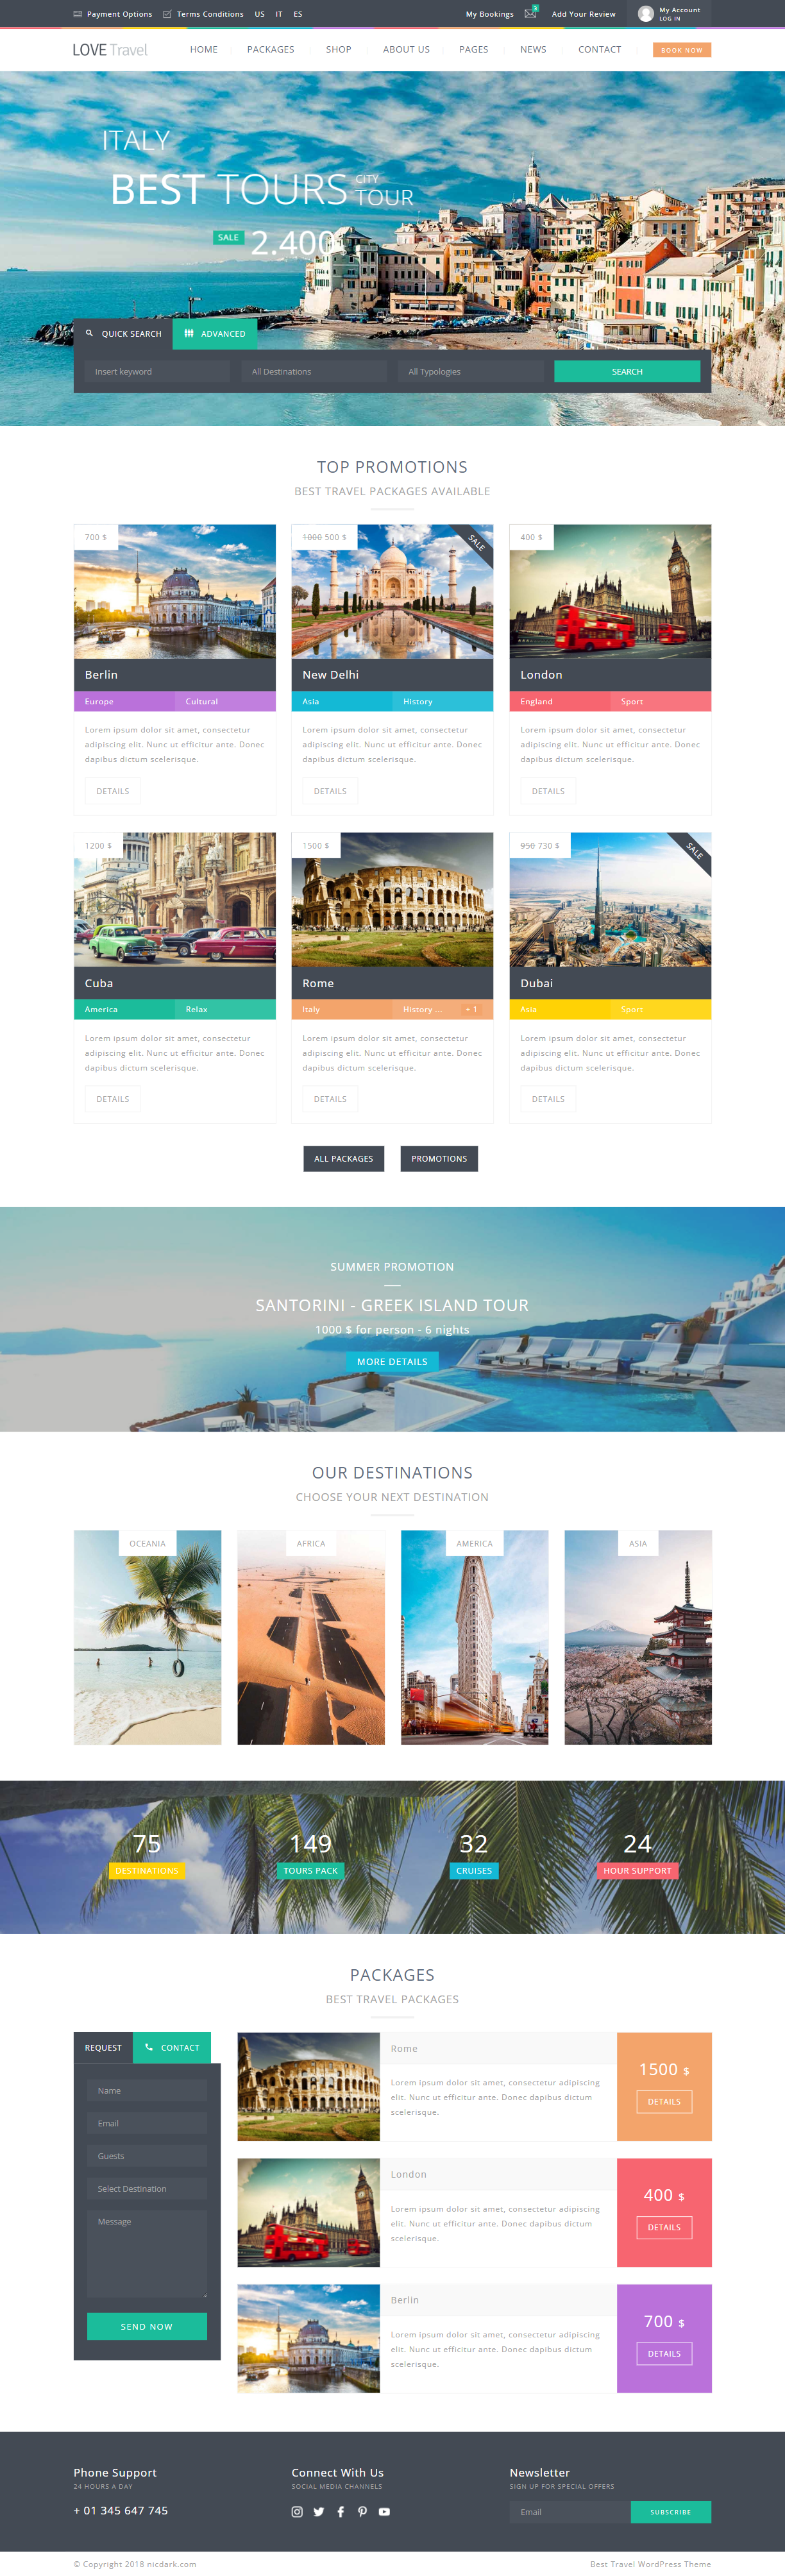 mẫu giao diện website du lịch love travel